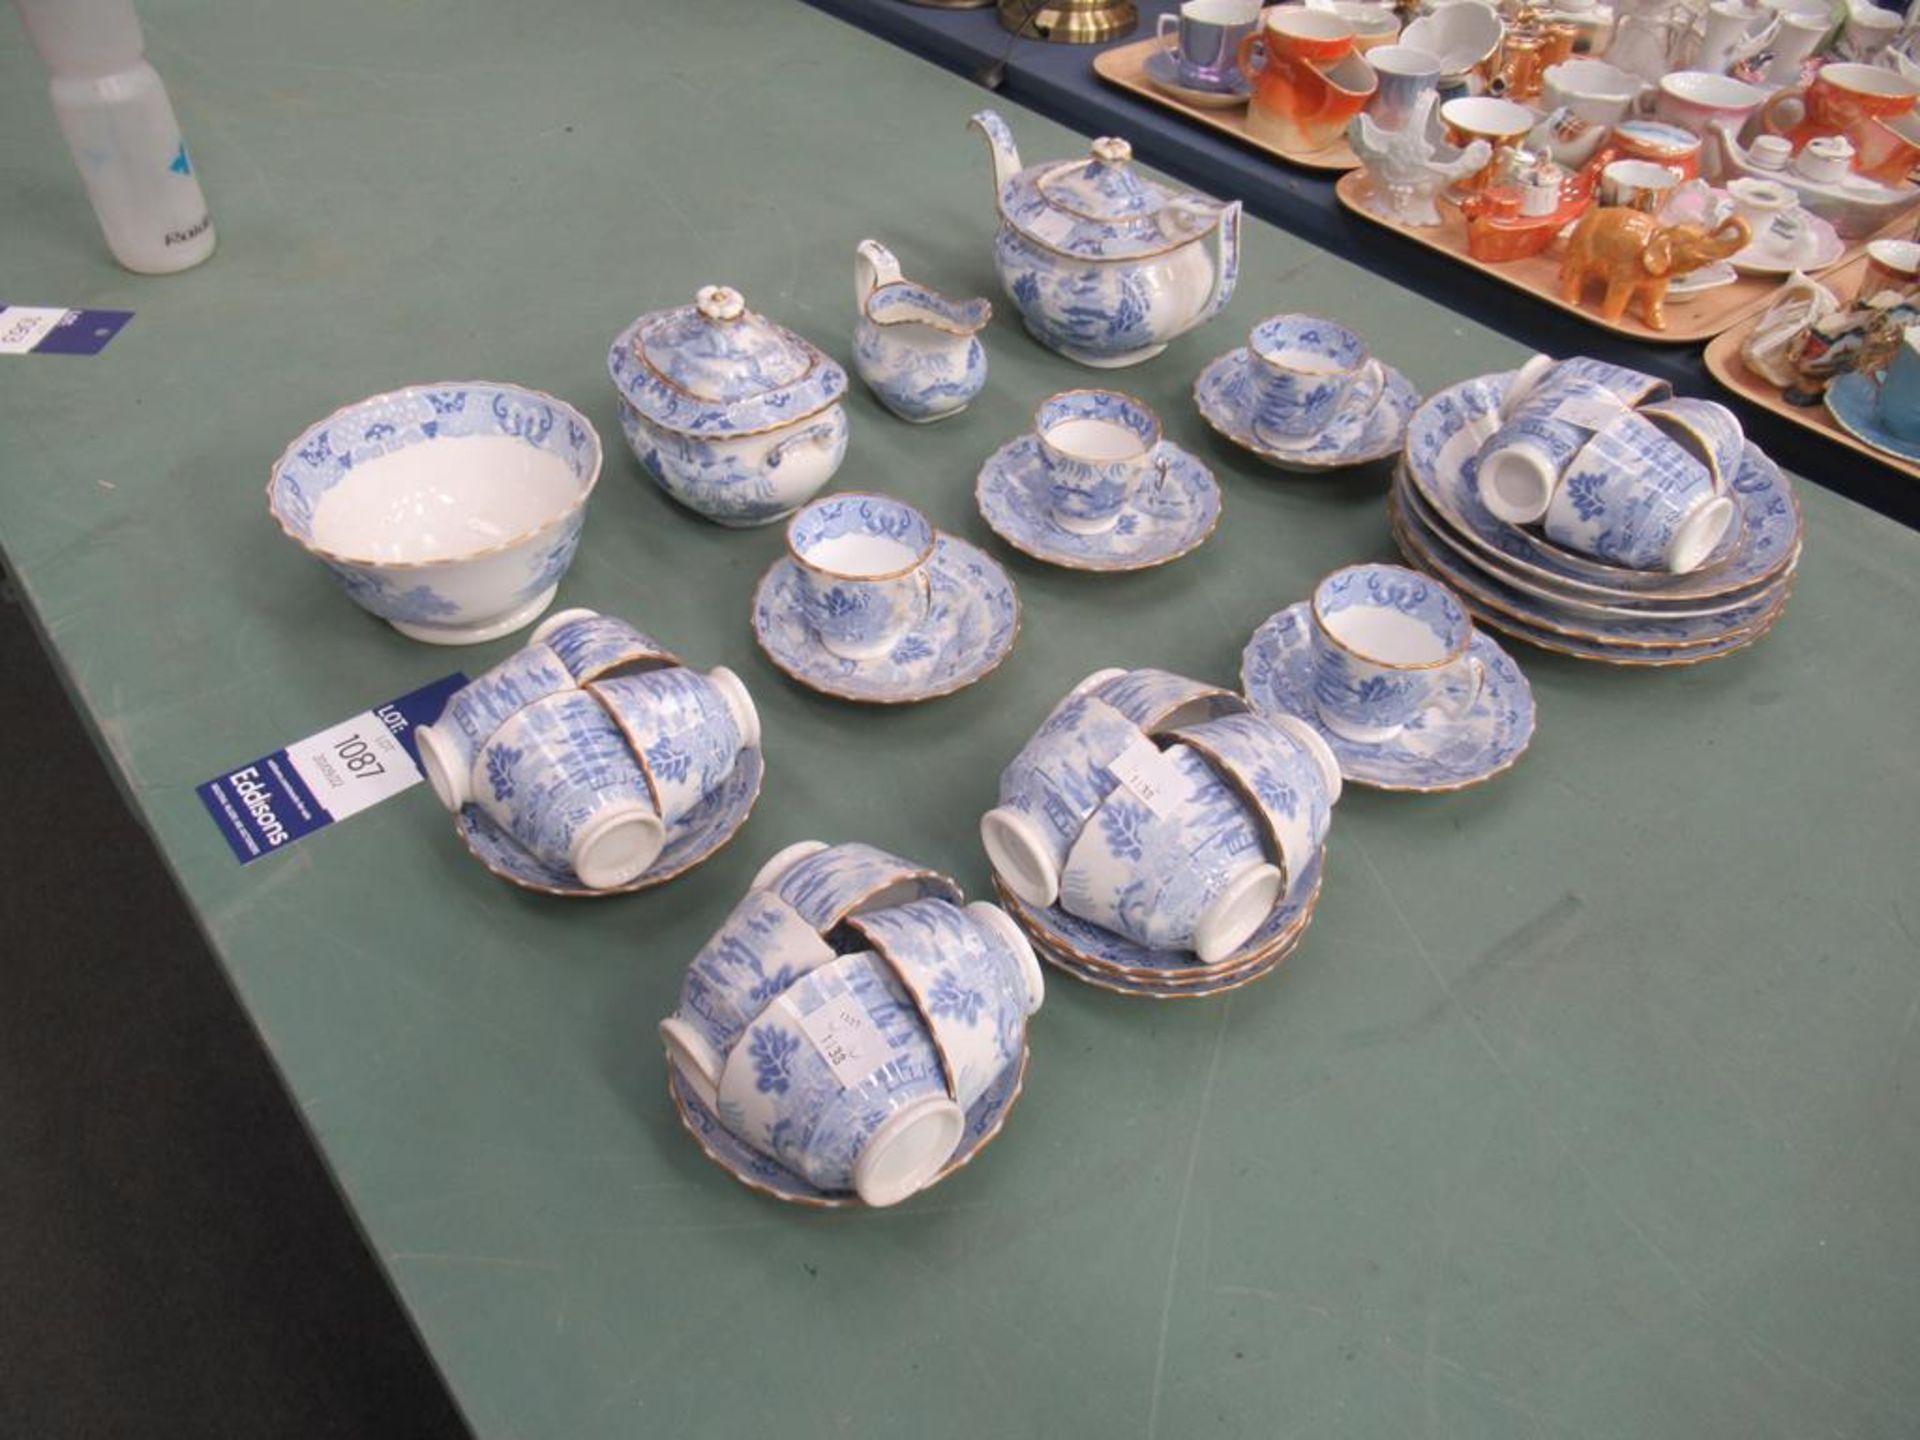 An Oriental Themed Blue & White Tea Service with Gold-Painted edging. - Image 3 of 4